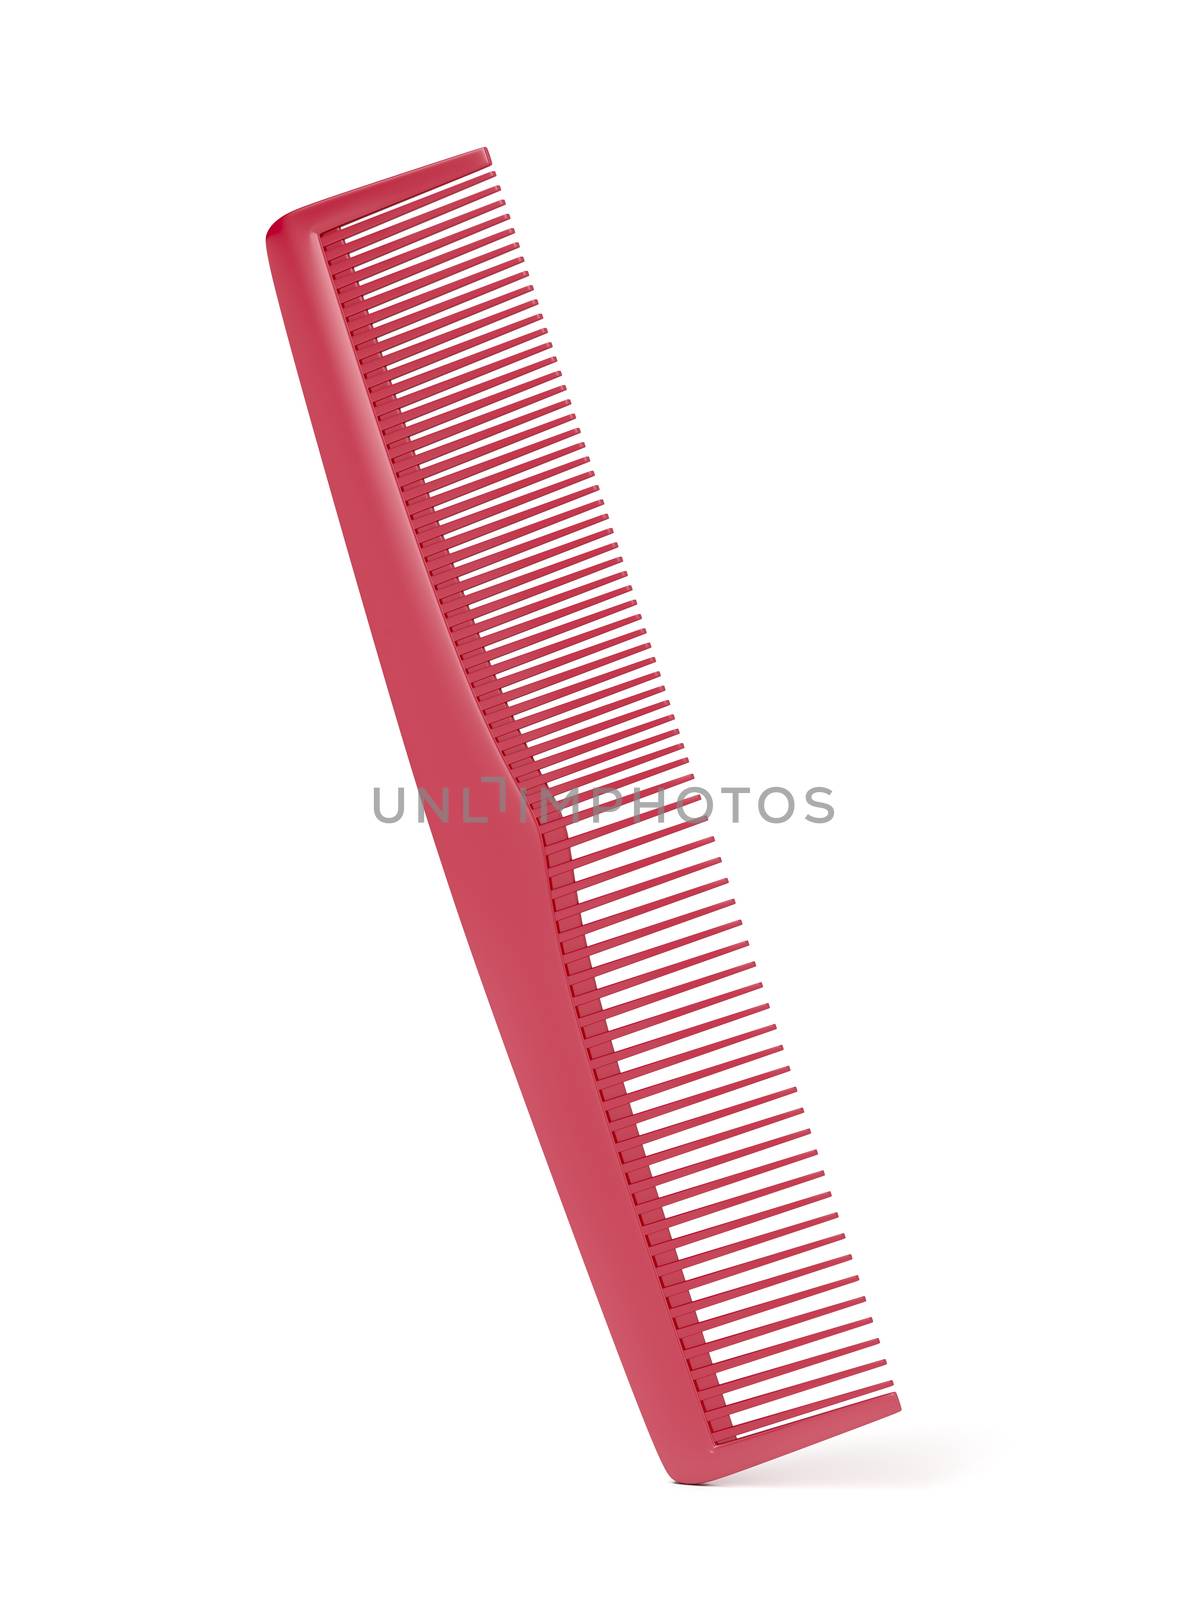 Red plastic comb by magraphics